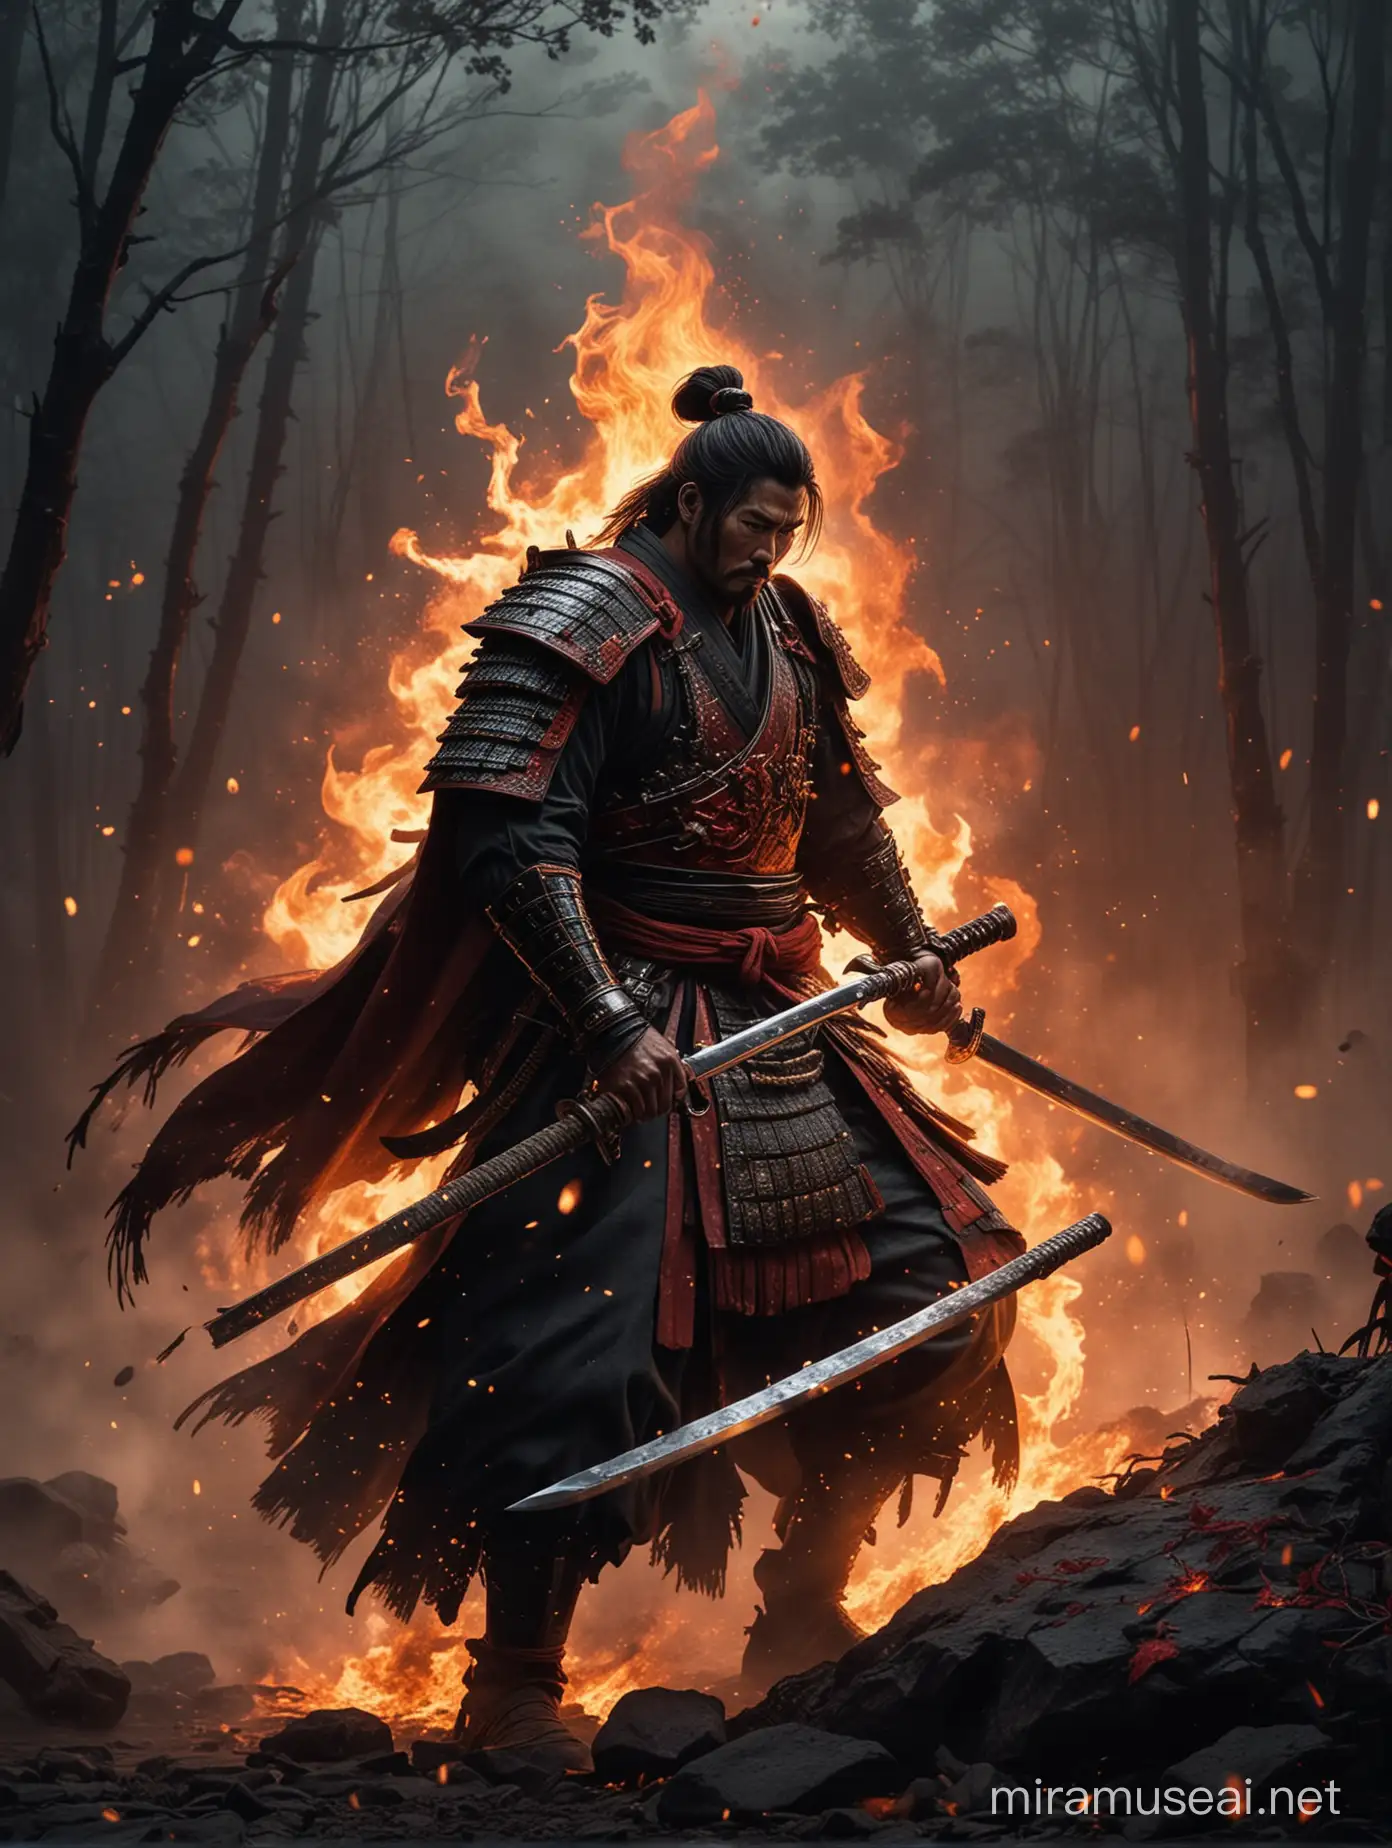 Samurai of Flames Master of Fire and Honor on the Moonlit Battlefield